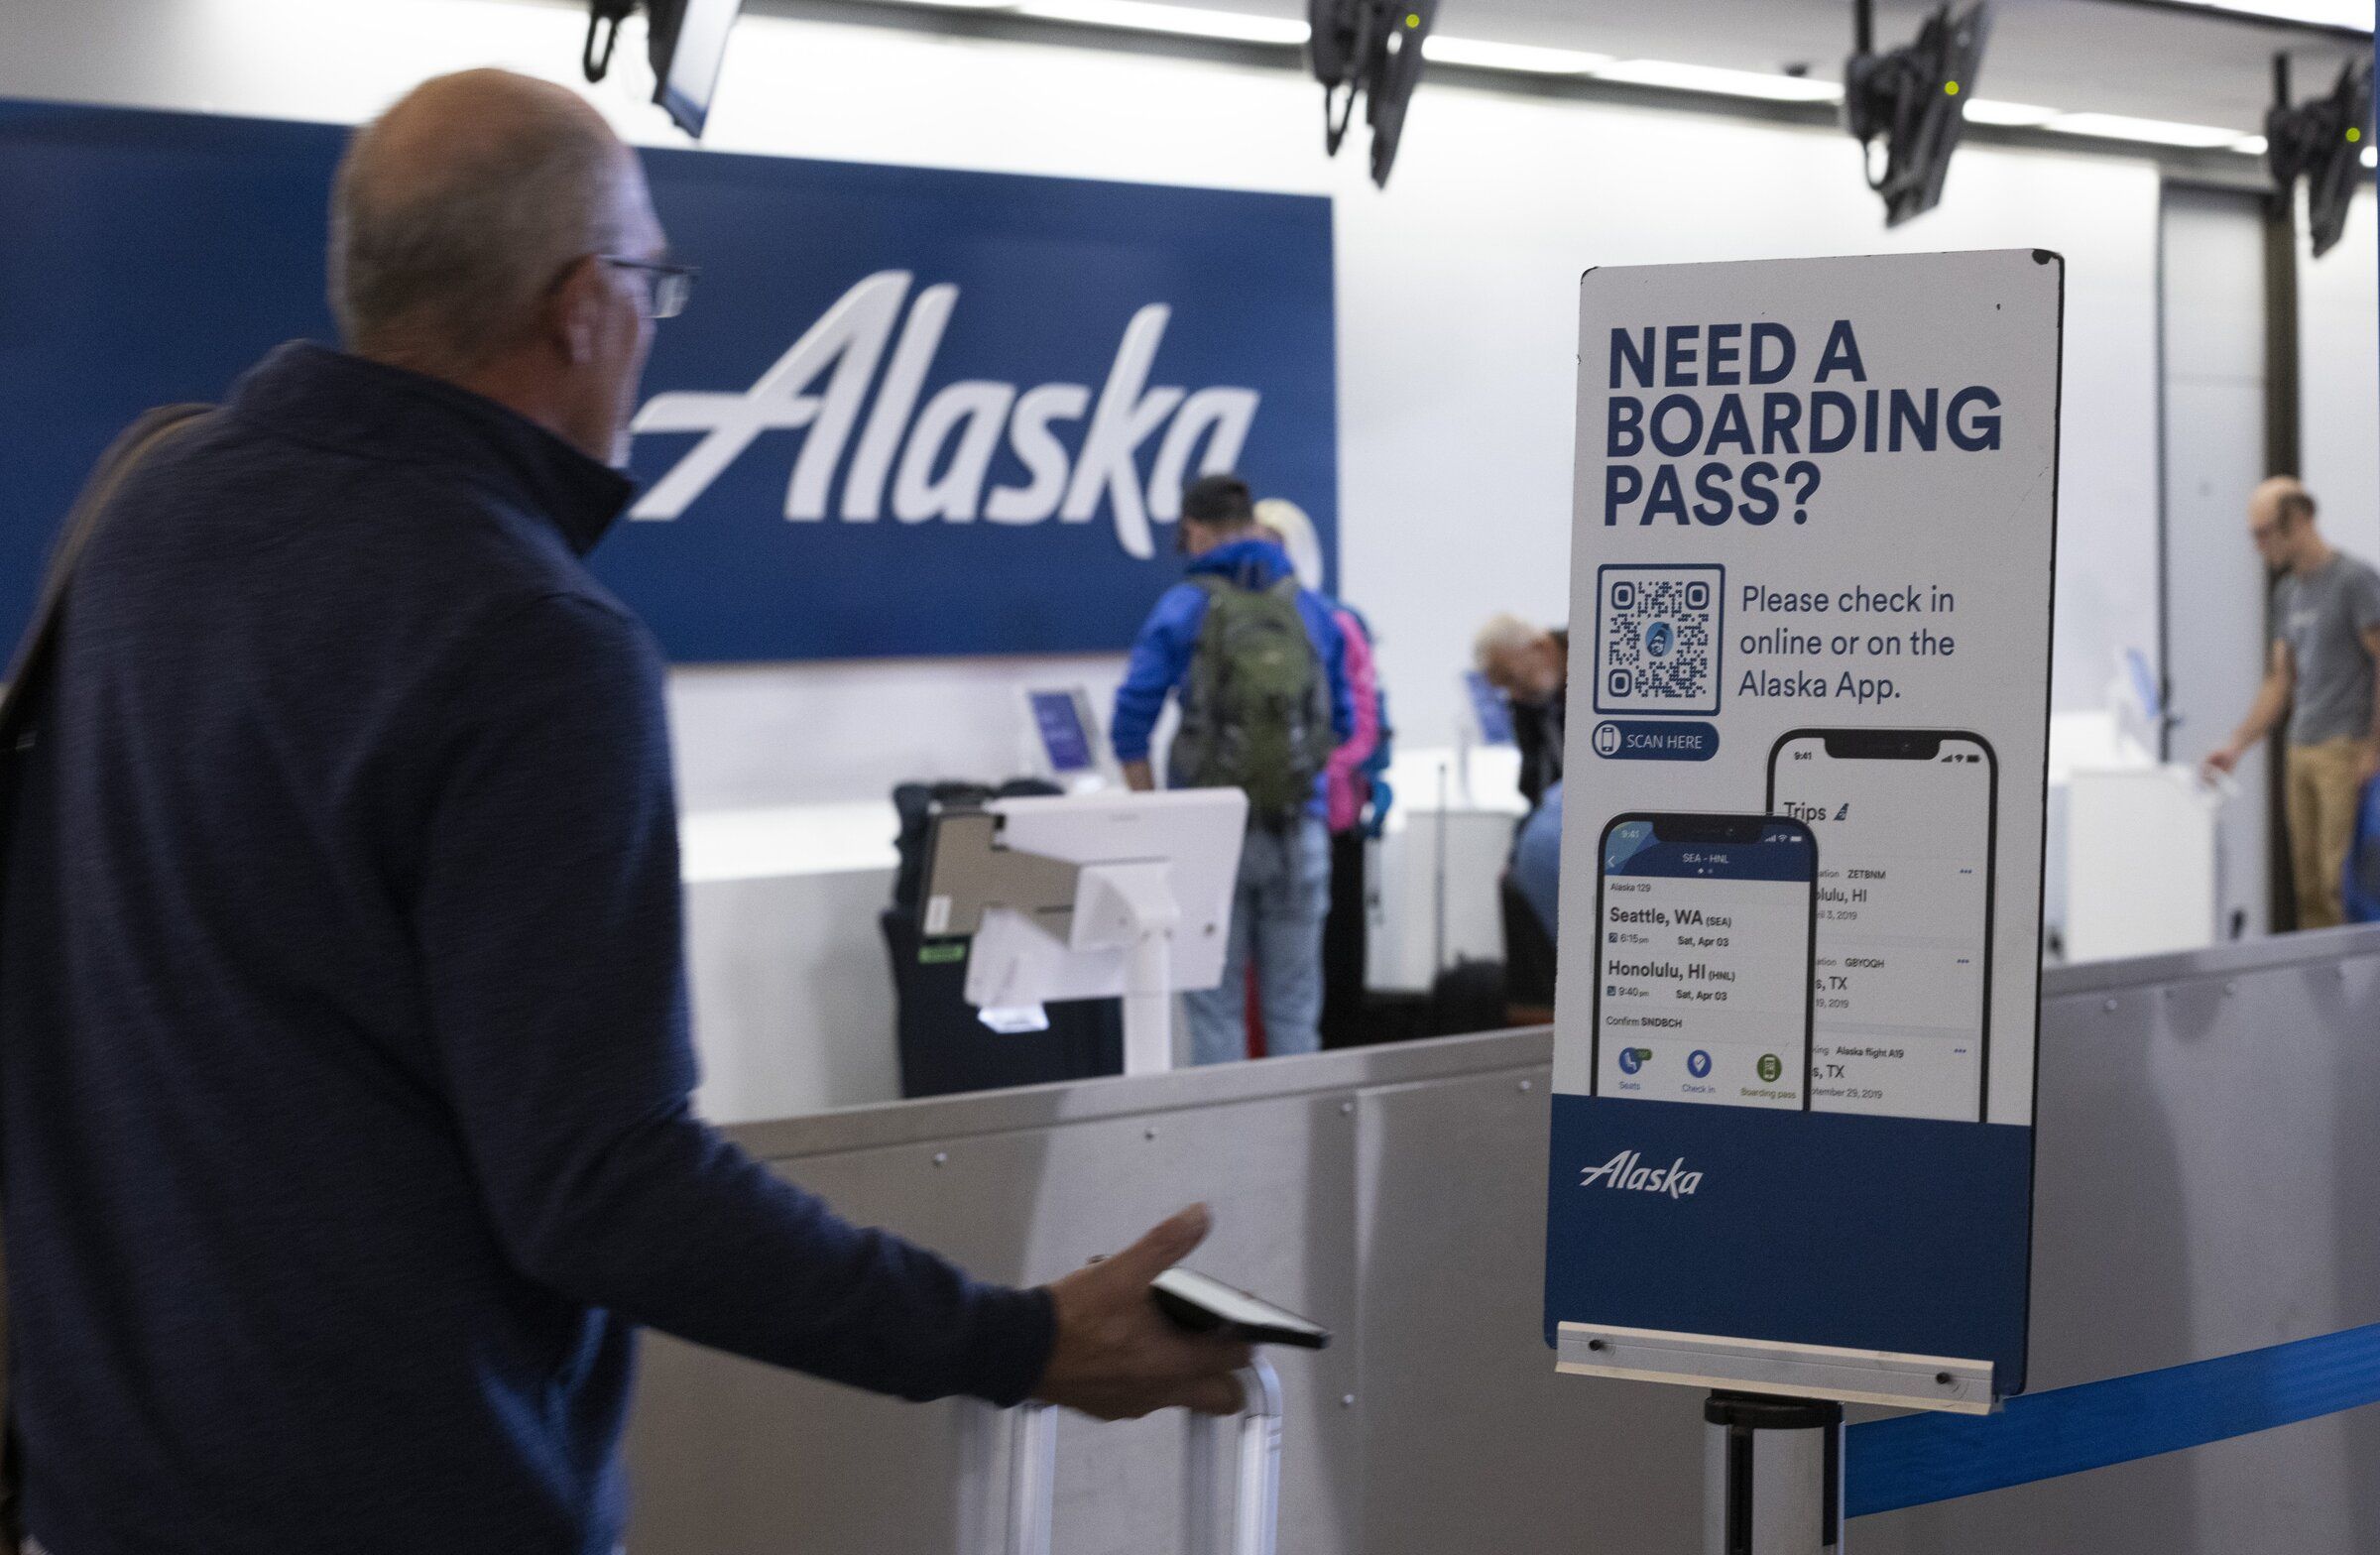 How to Avoid Baggage Fees on Alaska Airlines